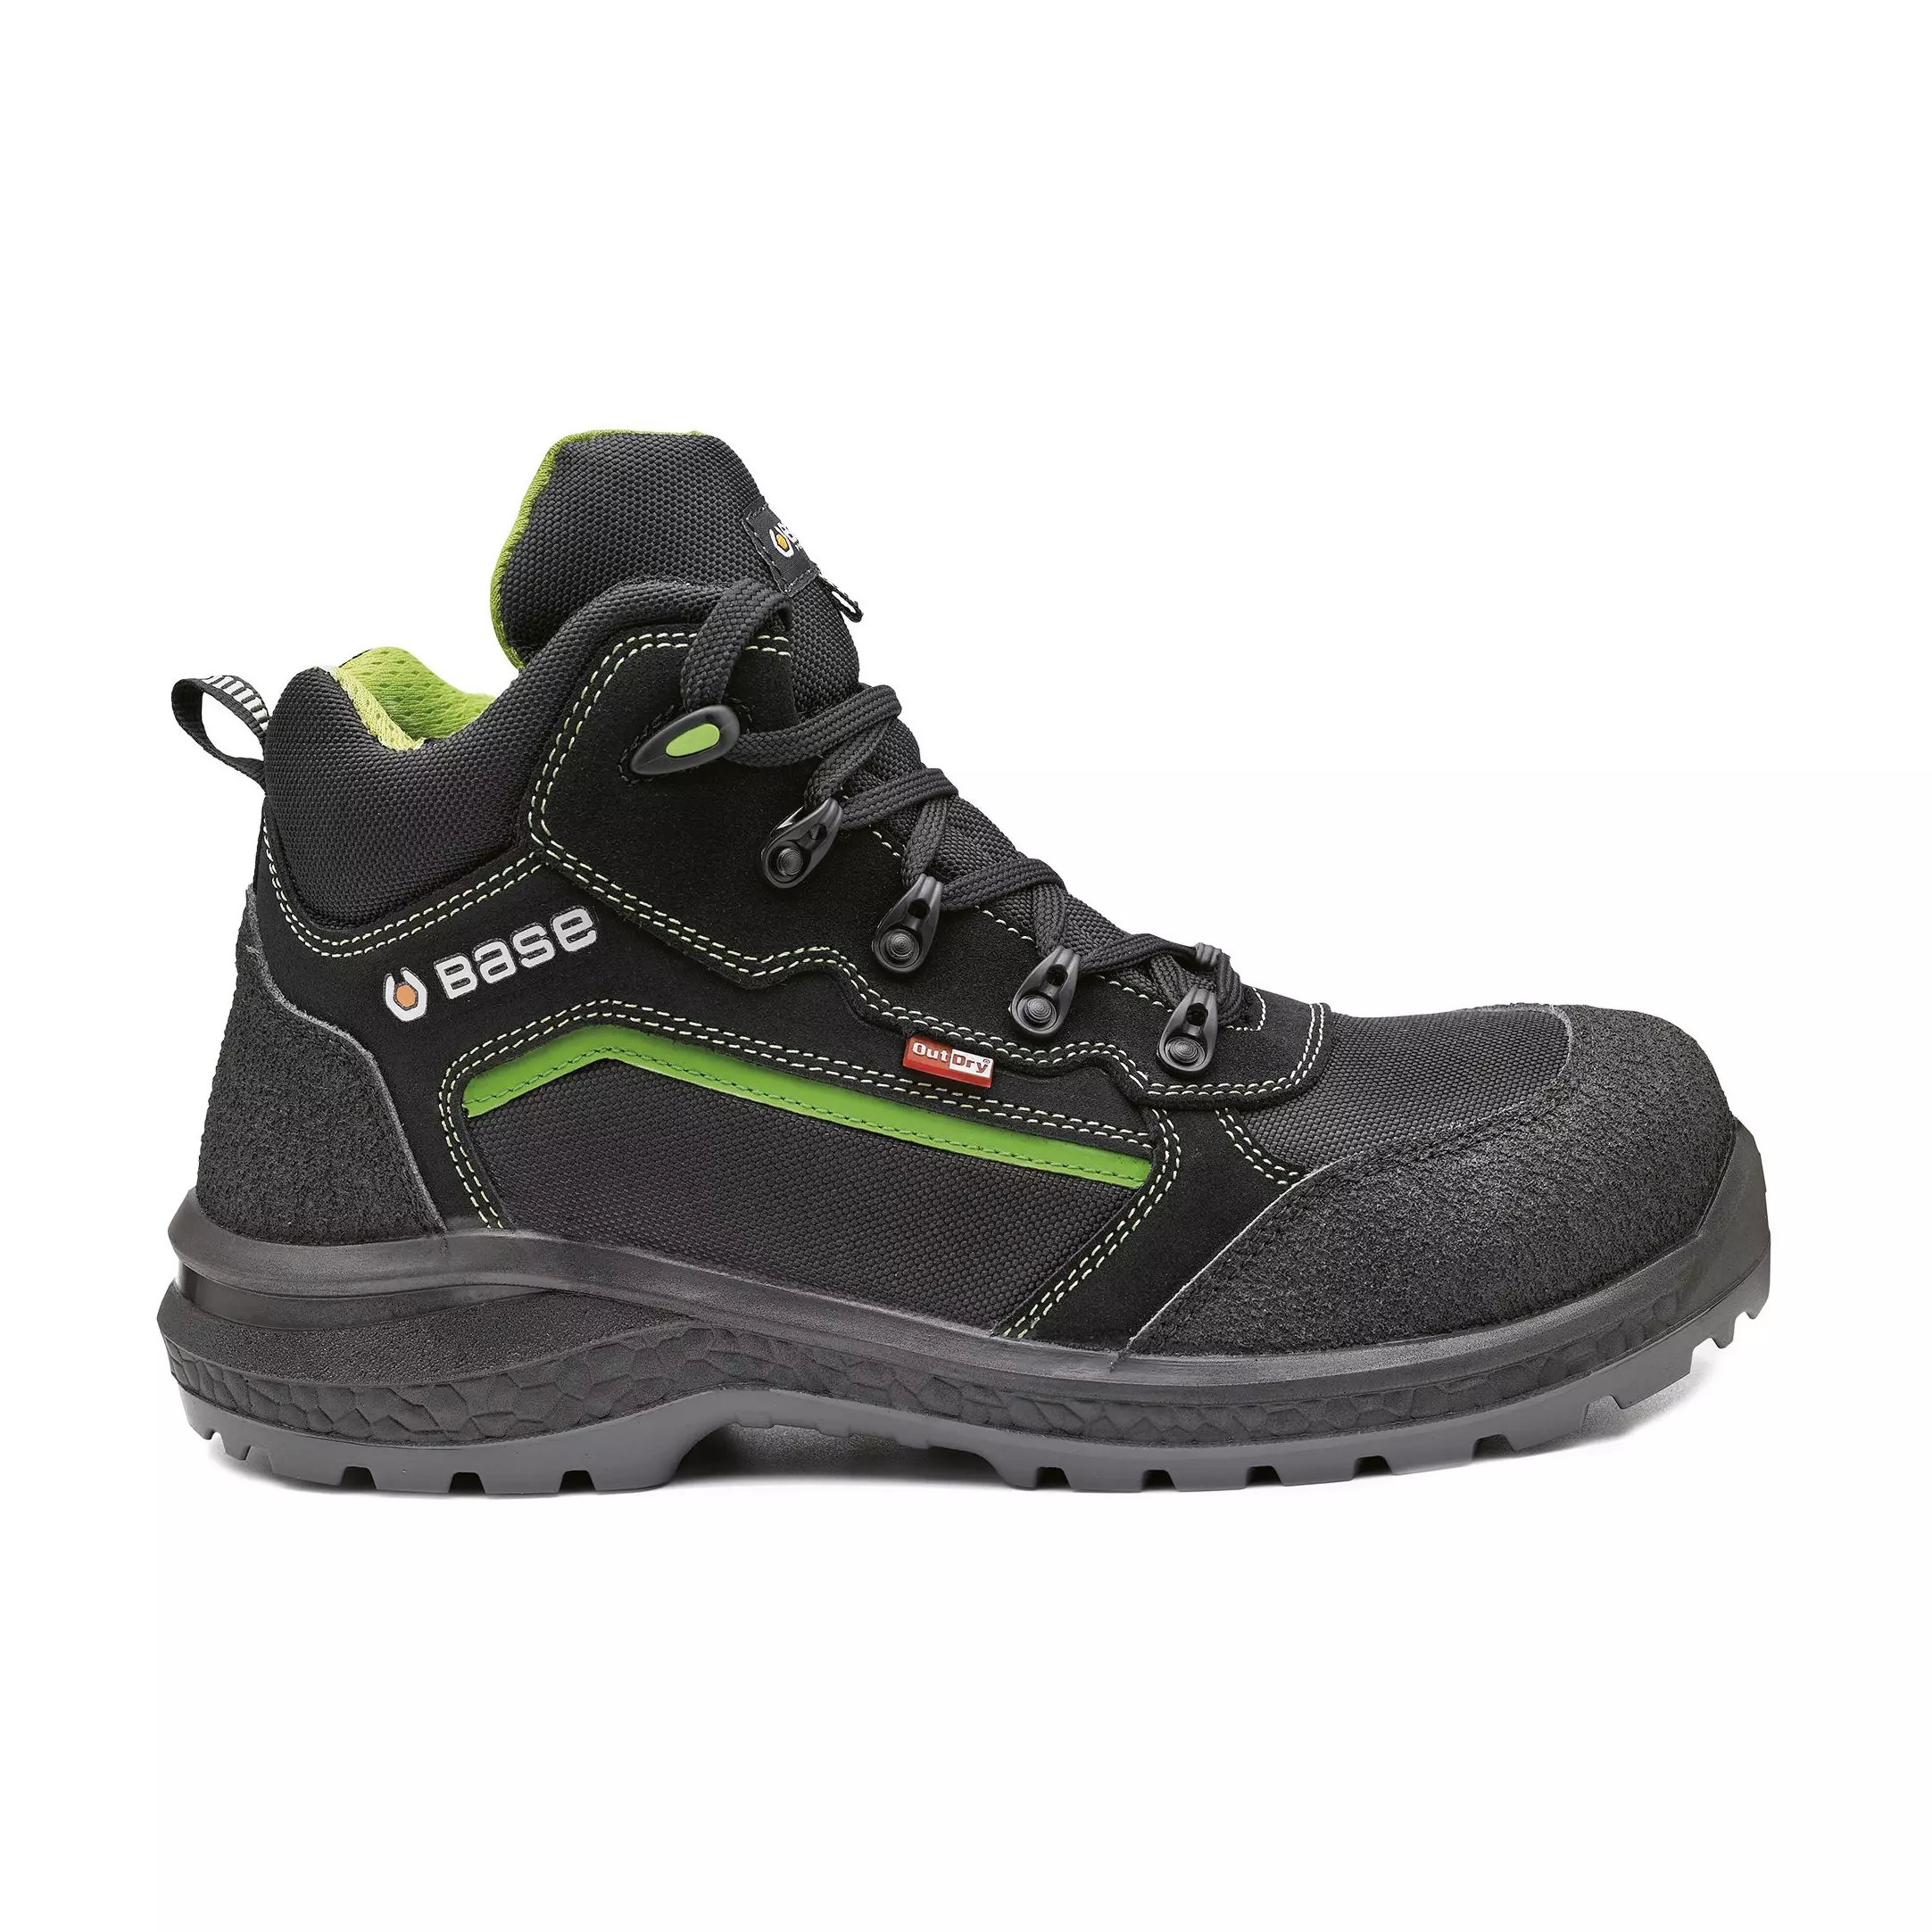 BASE SPECIAL Be-Powerful B0898 Stiefel S3 WR SRC - 45